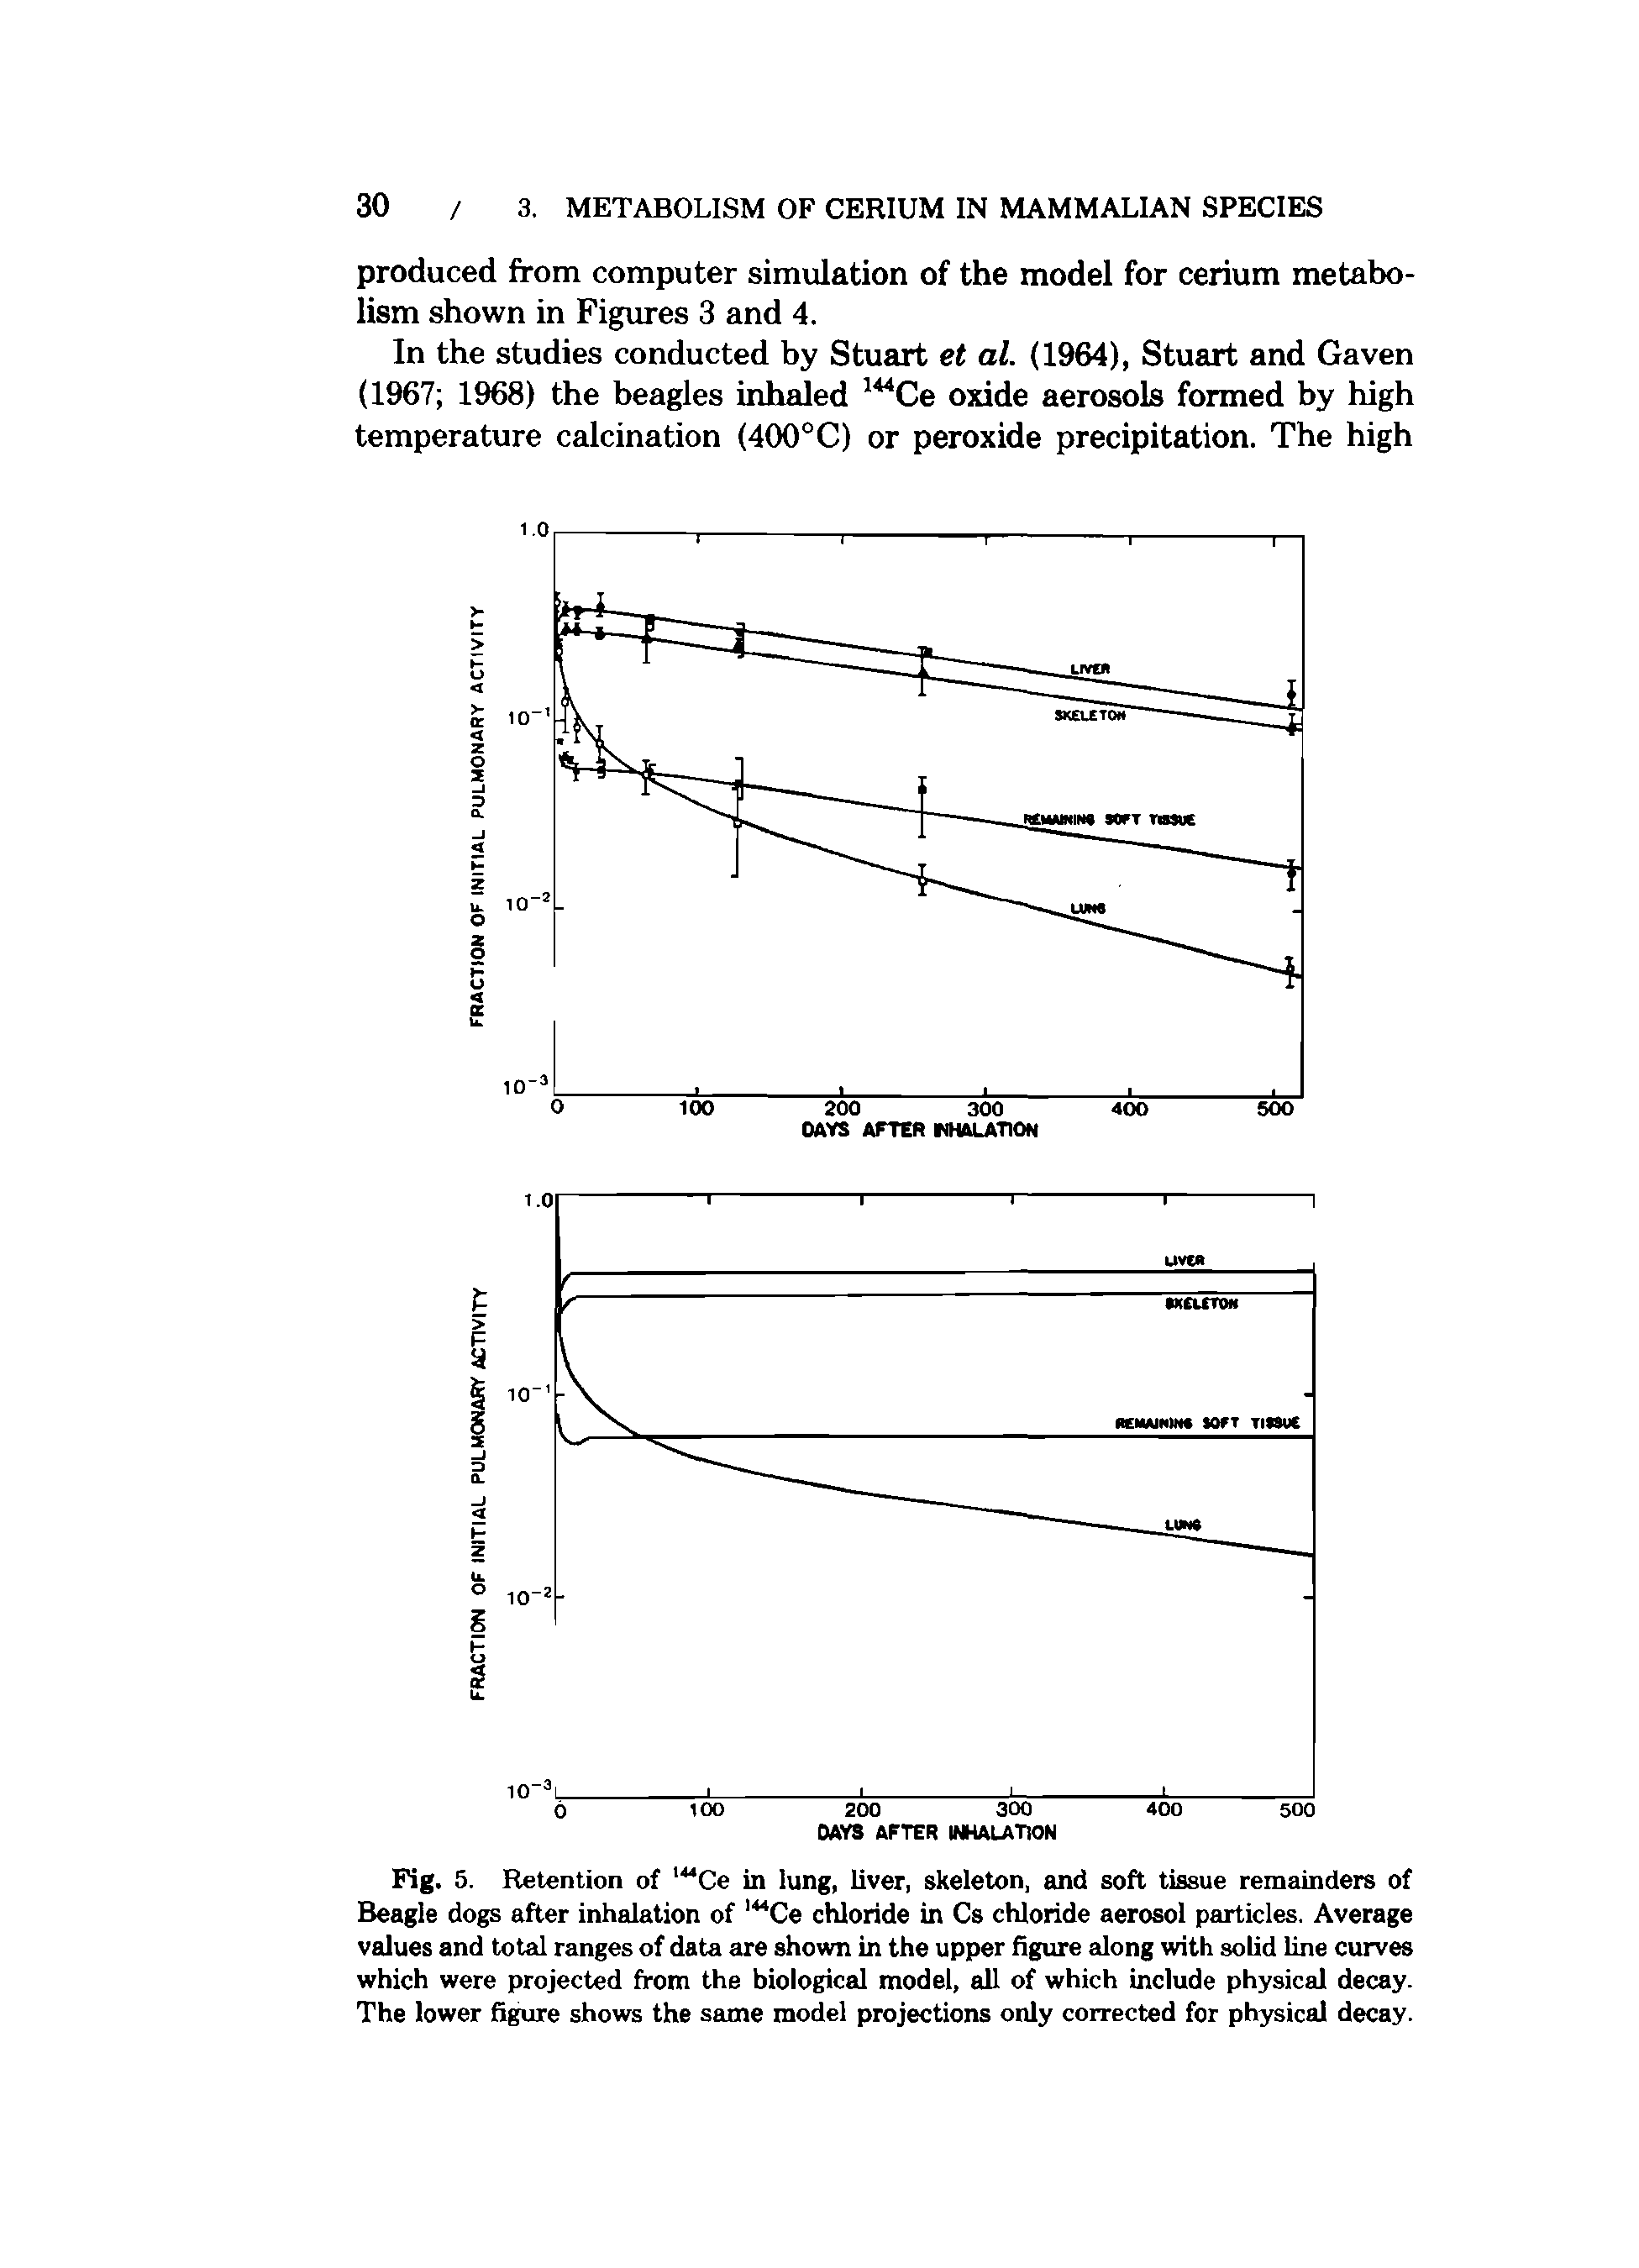 Fig. 5. Retention of 144Ce in lung, liver, skeleton, and soft tissue remainders of Beagle dogs after inhalation of l44Ce chloride in Cs chloride aerosol particles. Average values and total ranges of data are shown in the upper figure along with solid line curves which were projected from the biological model, all of which include physical decay. The lower figure shows the same model projections only corrected for physical decay.